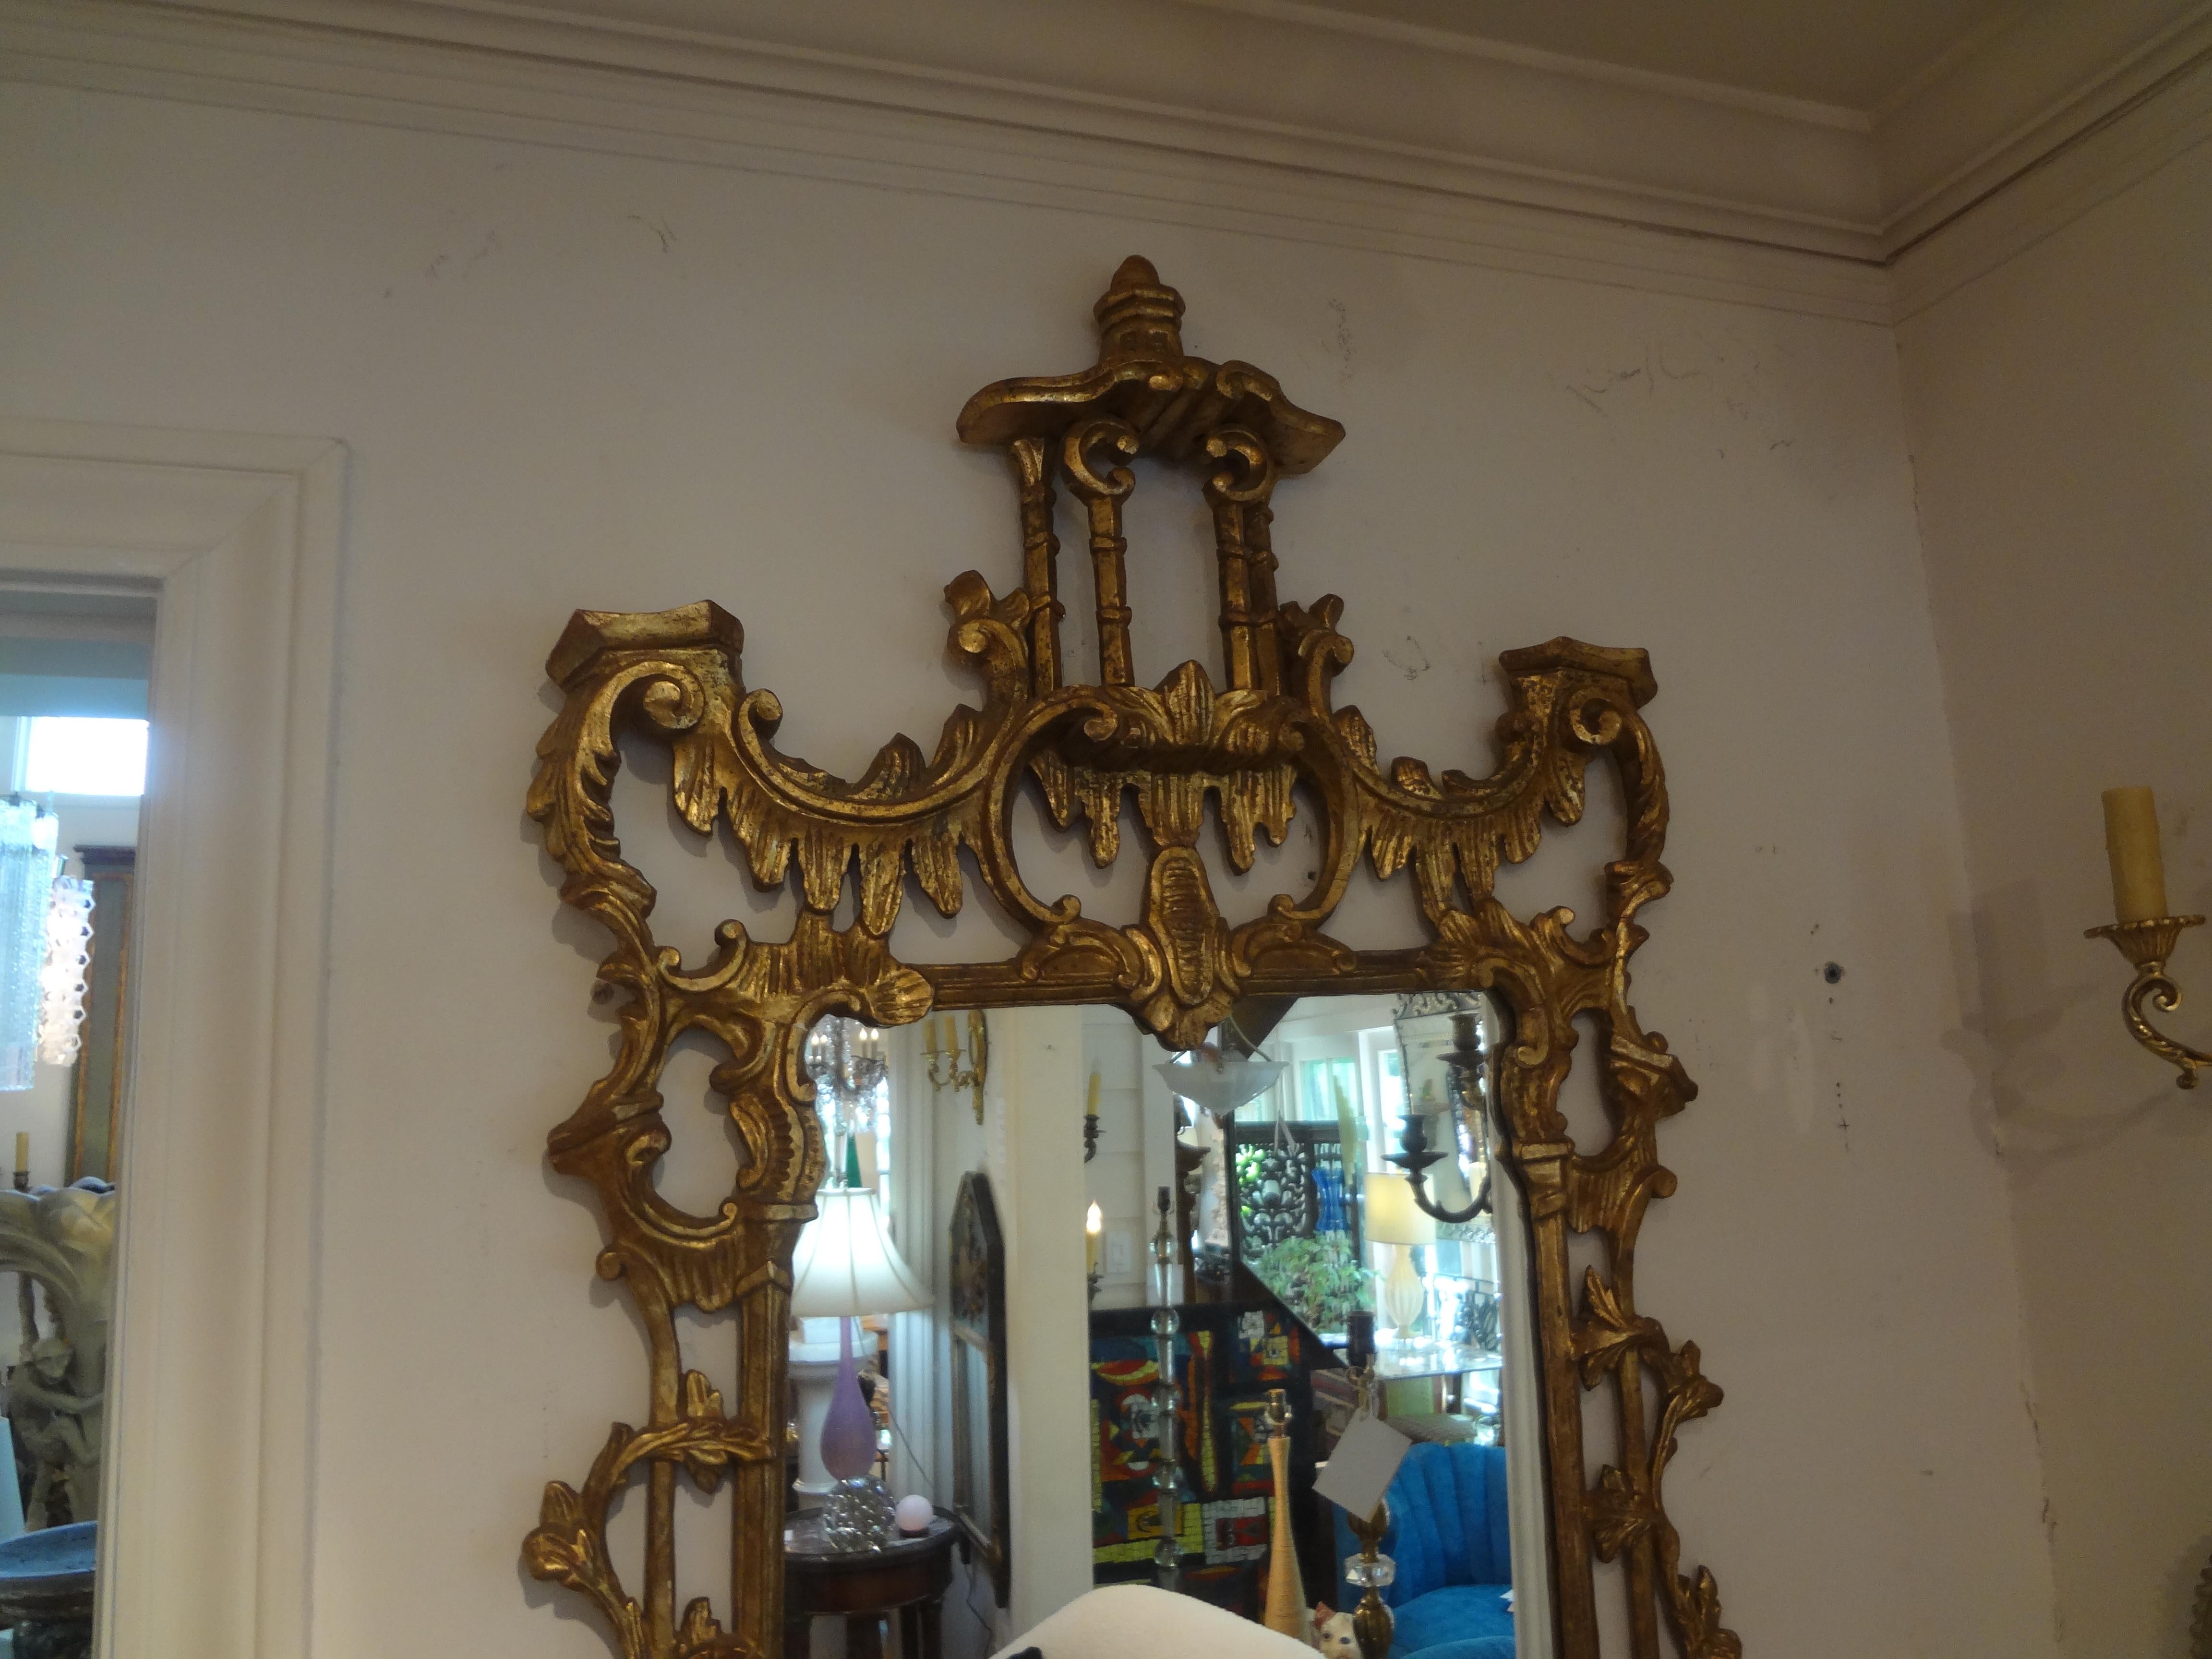 Vintage Italian Chinese Chippendale Style carved giltwood pagoda mirror.
Vintage Chinese Chippendale style carved gilt wood pagoda mirror. This large Chinese Chippendale wood mirror is the perfect accent for an entrance hall above a console,